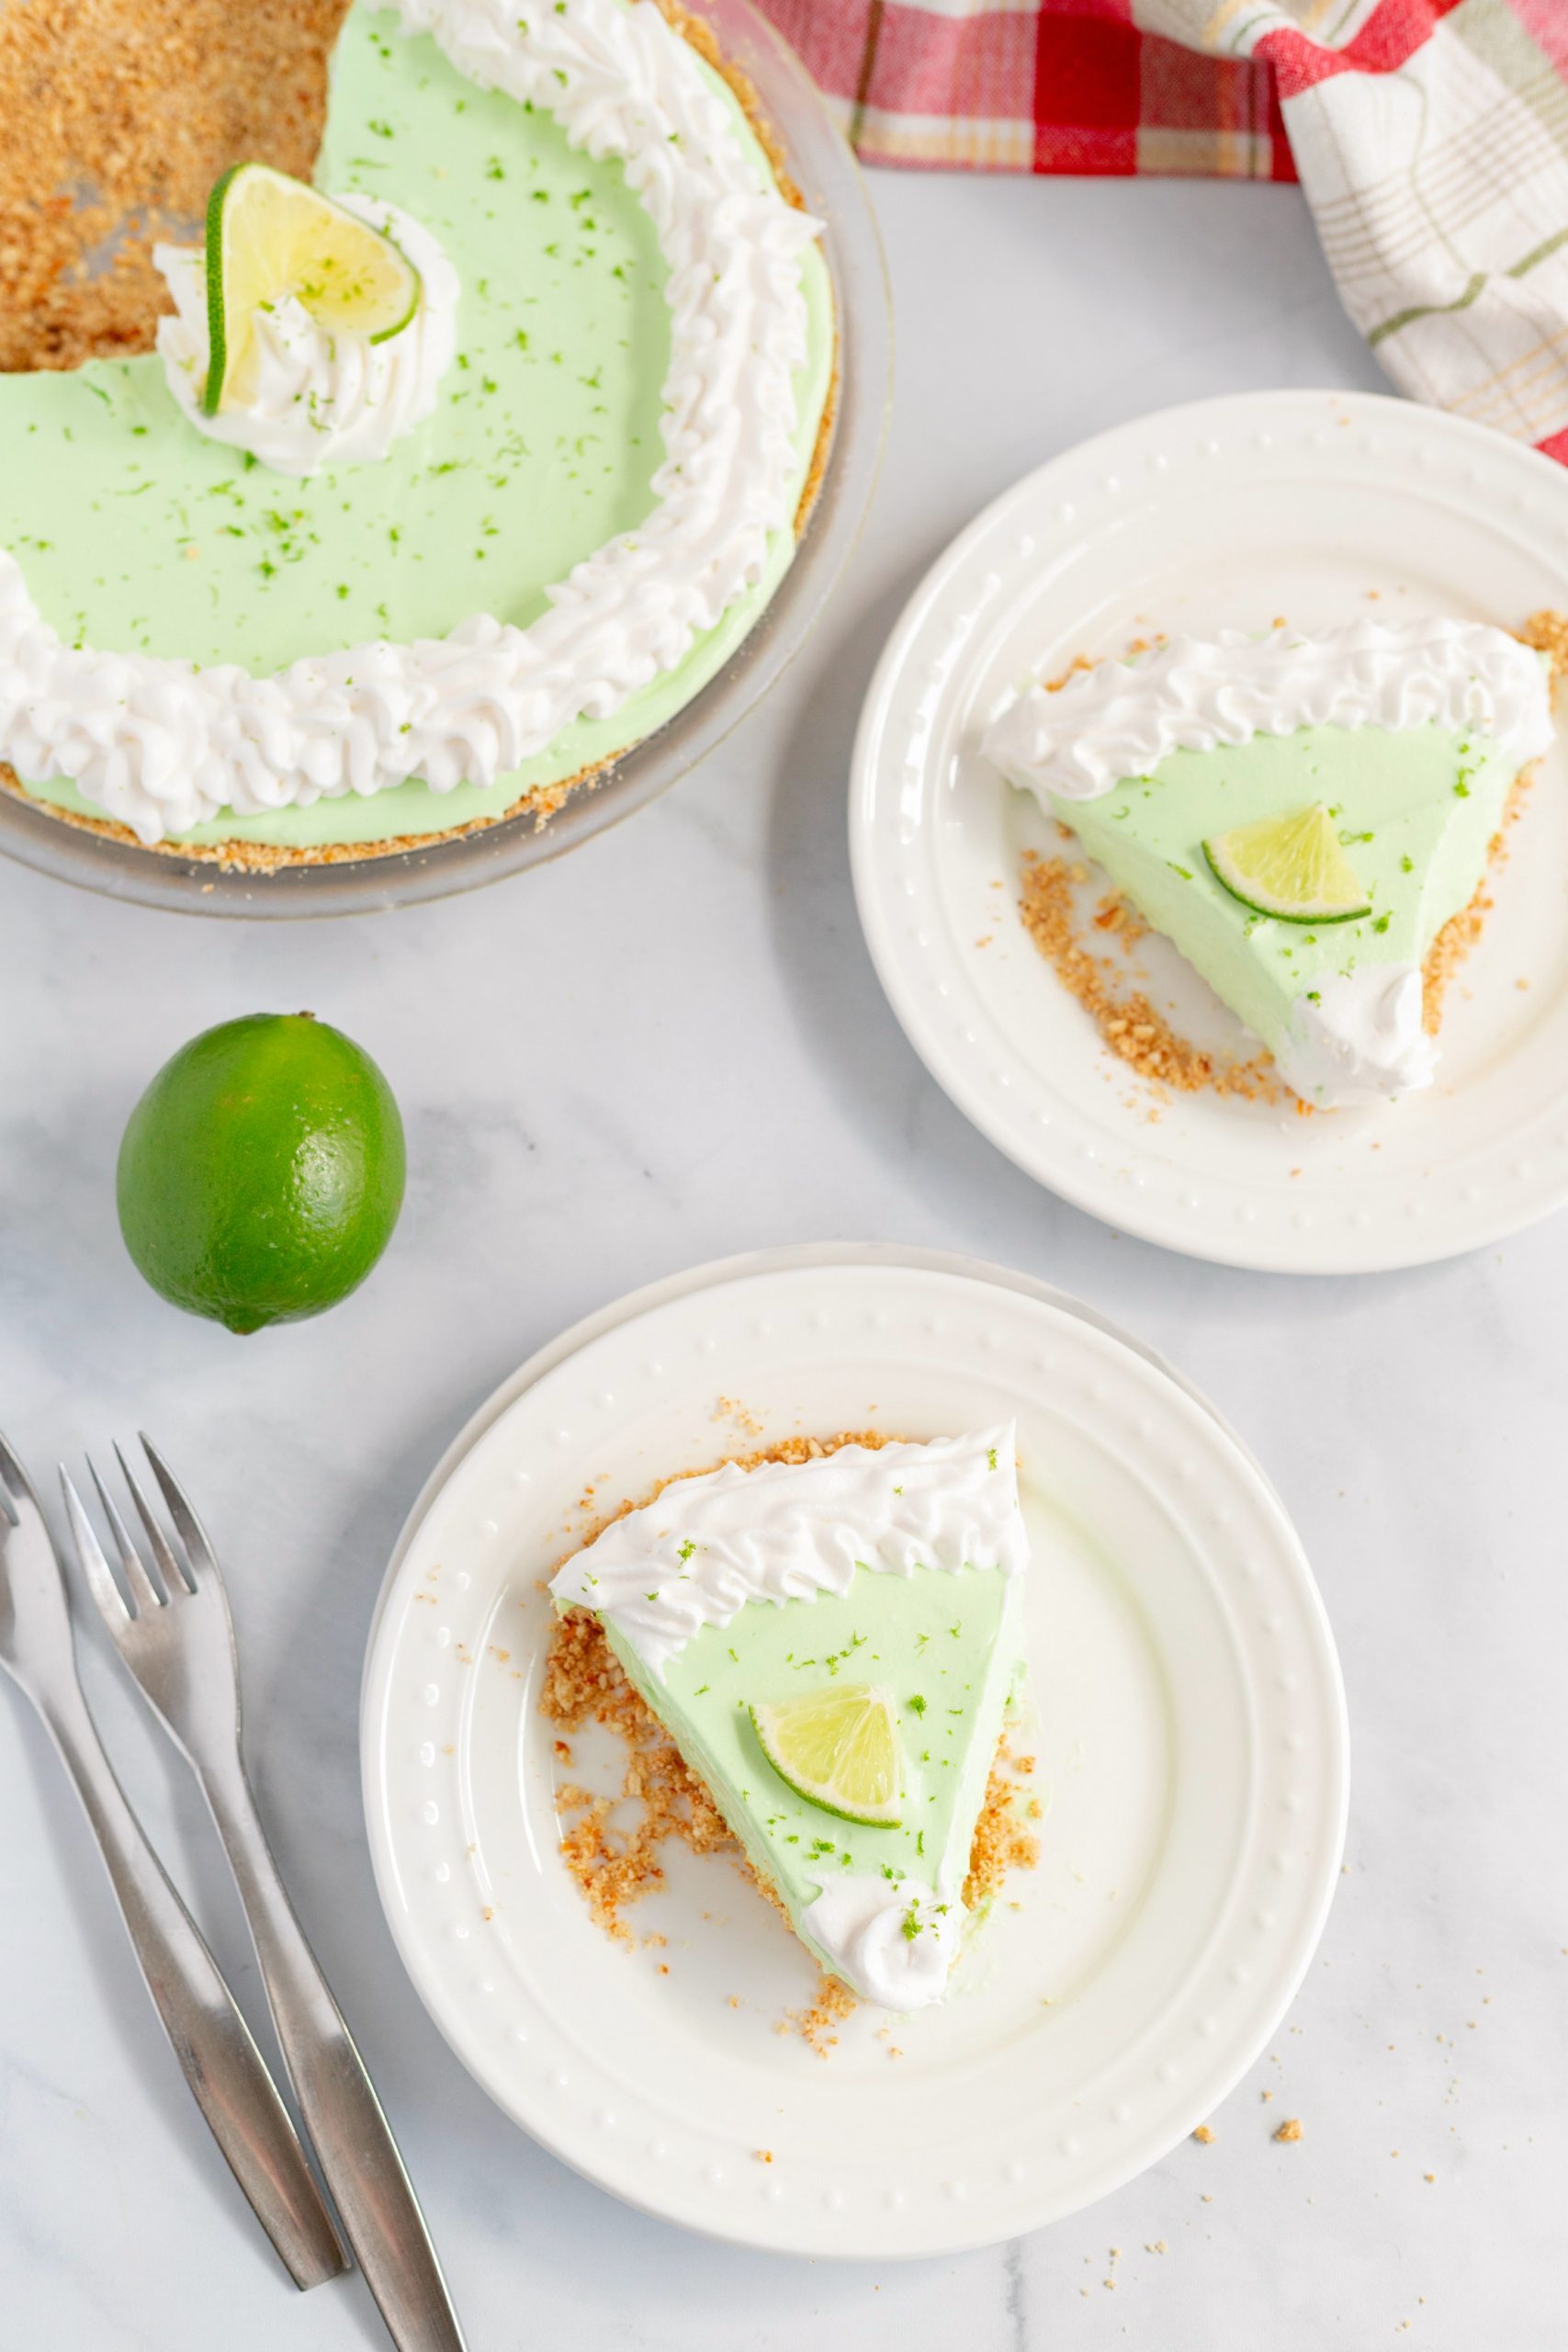 Slices of Key Lime Margarita Pie on white plates, fresh lime on the table